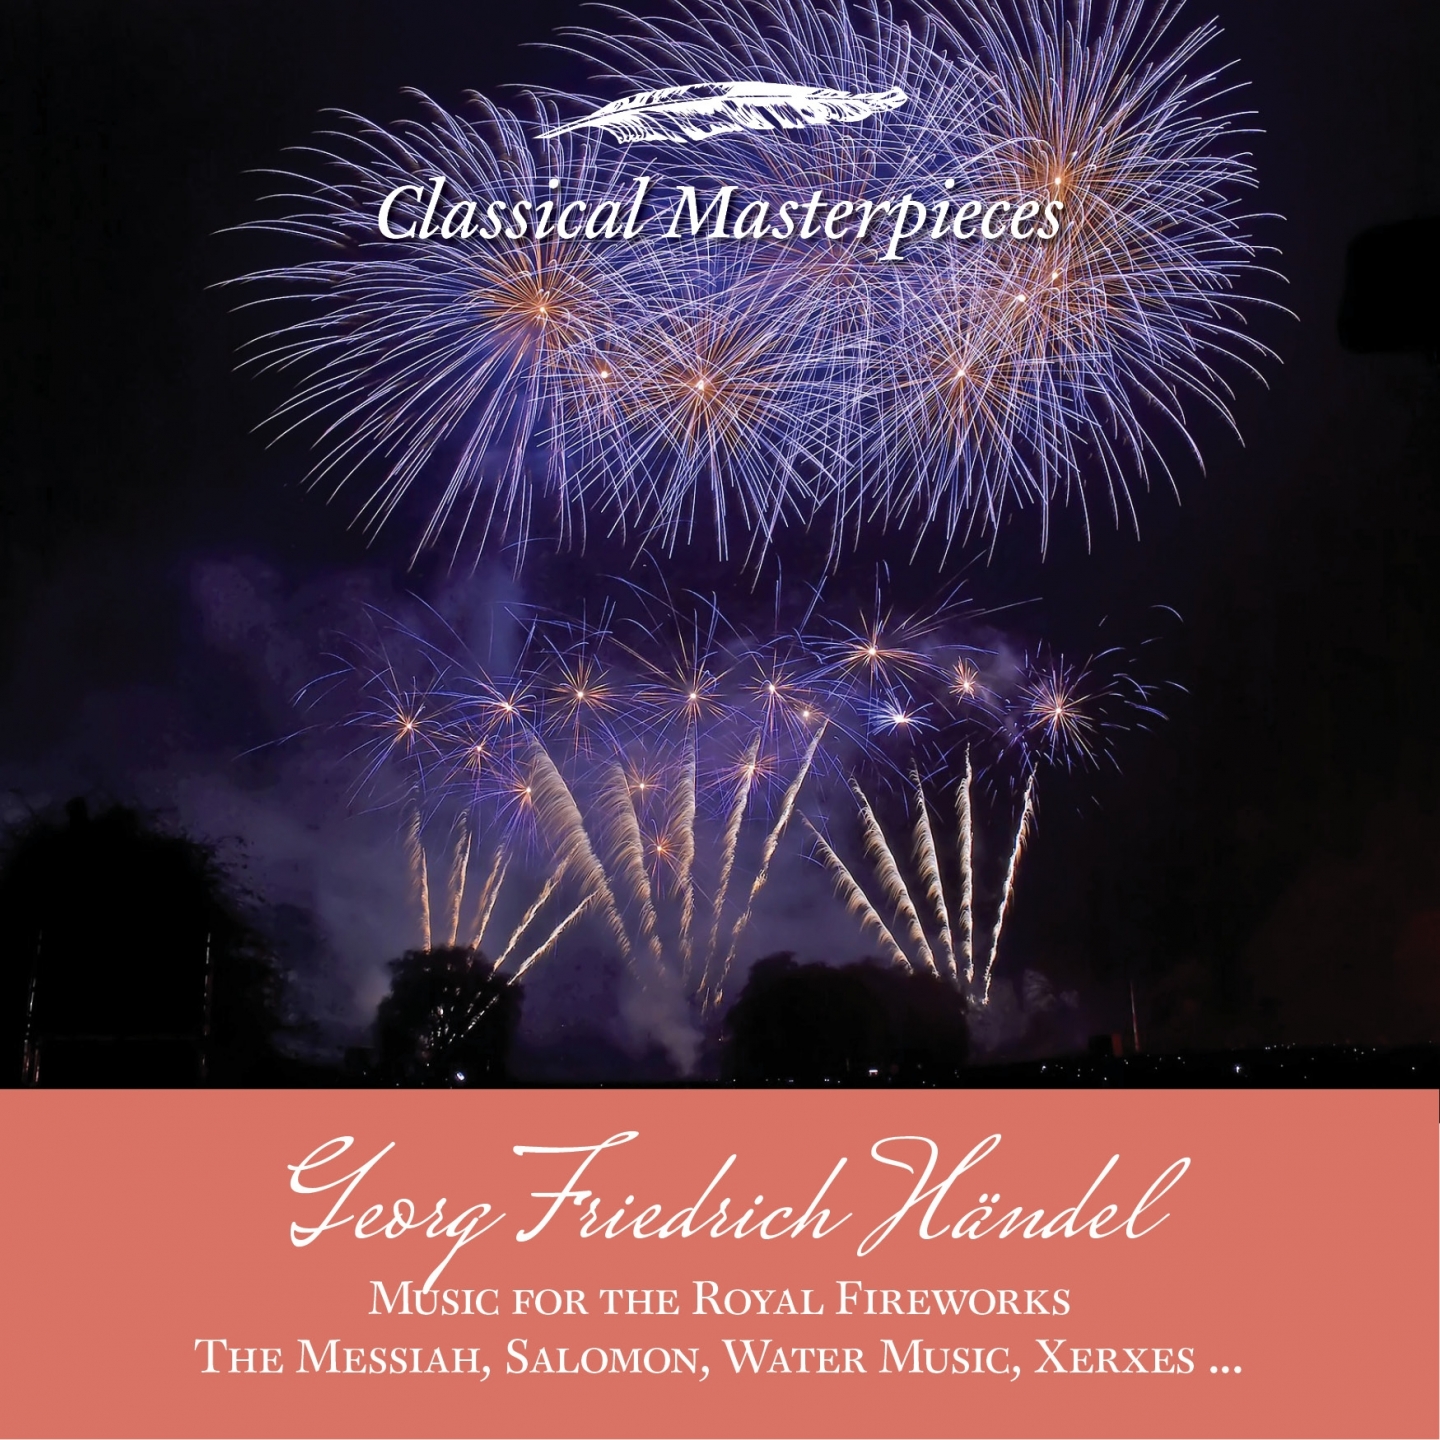 Georg Friedrich H ndel: Music for the Royal Fireworks, The Messiah, Salomon, Water Music, Xerxes